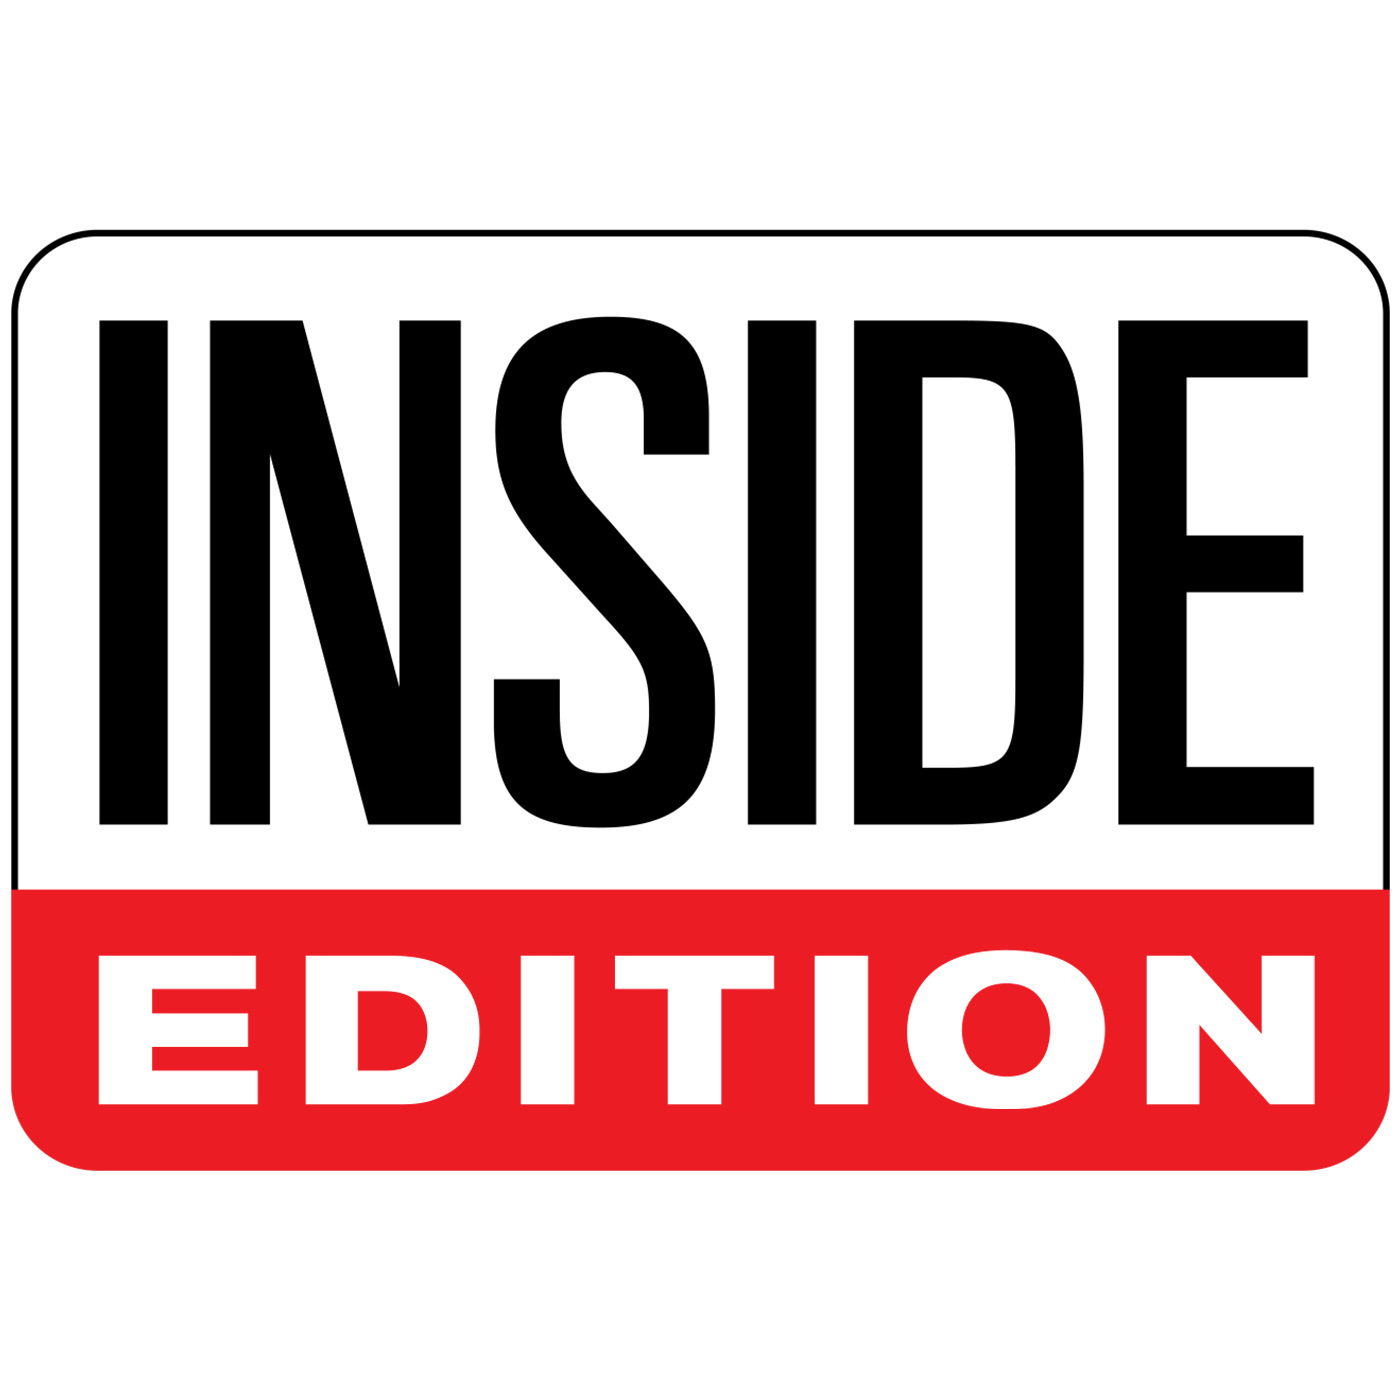 Inside Edition: Inside Report for Friday, 12/13/19